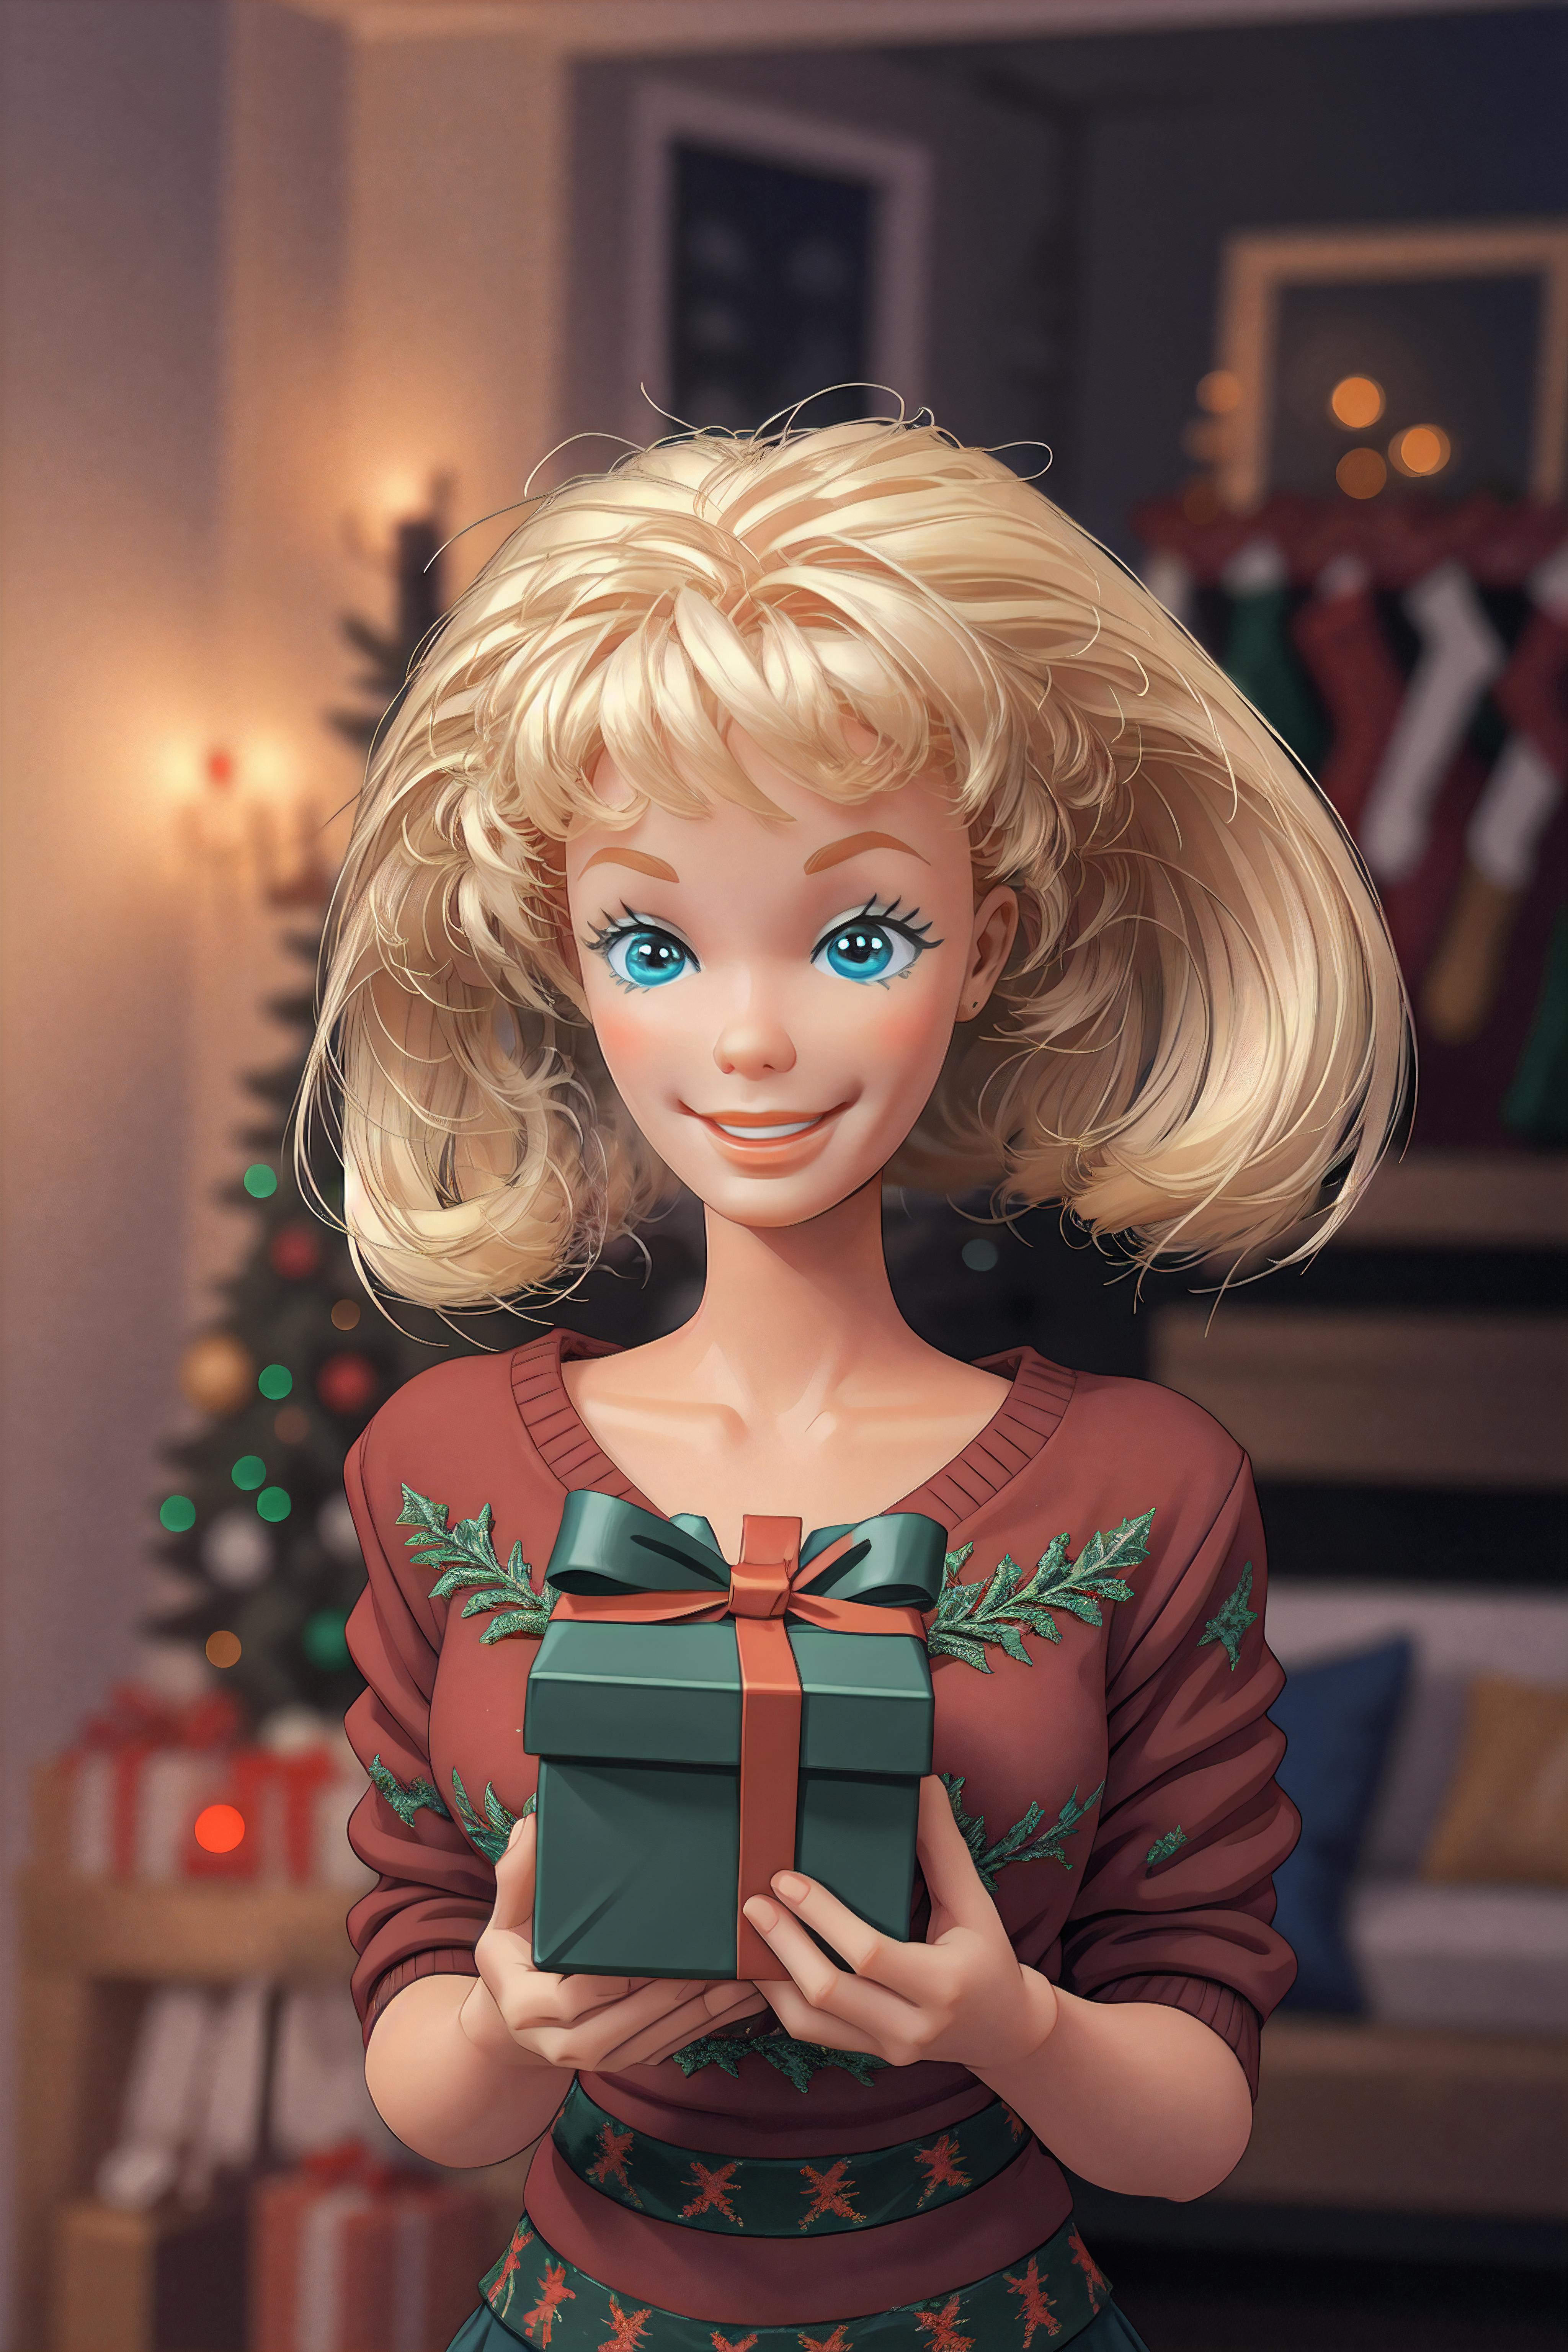 A beautifully rendered illustration of a young woman with blonde hair holding a green gift box.